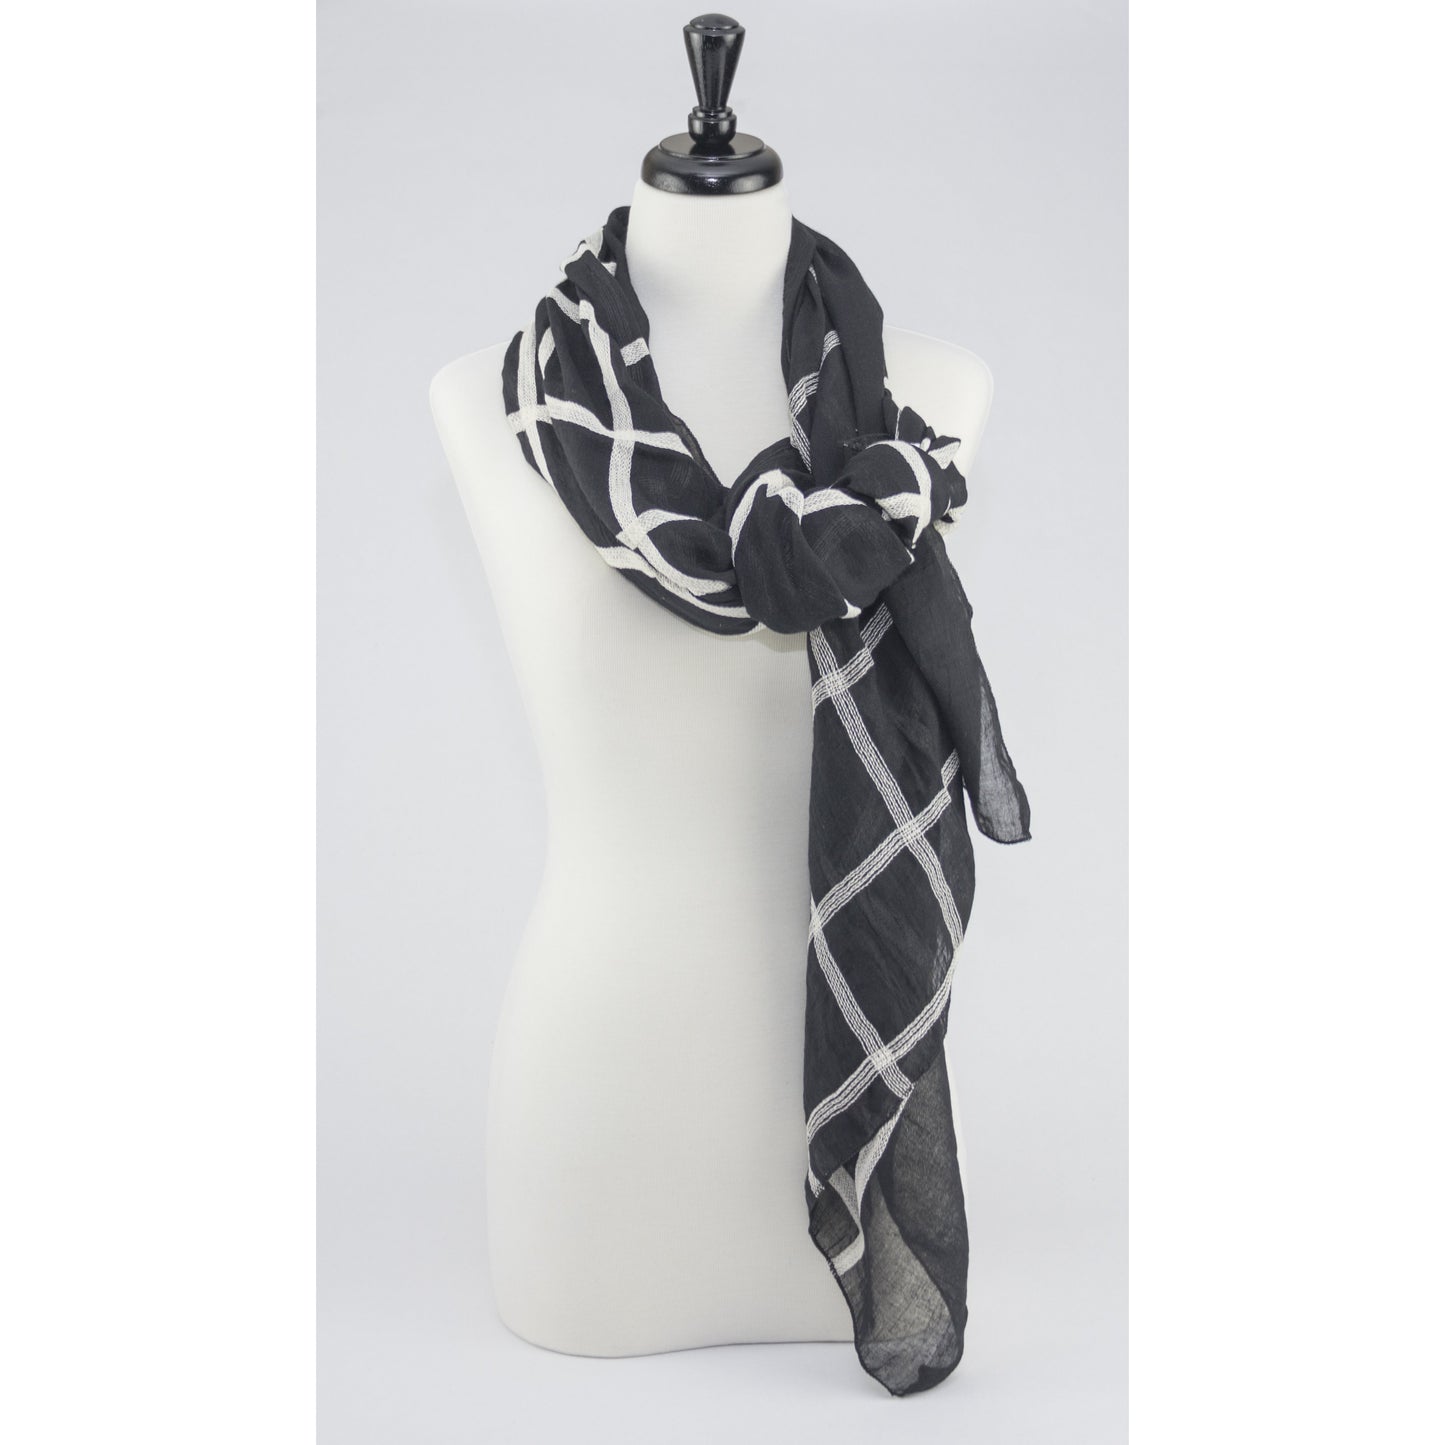 Grid - Modestia Collection is a scarf brand with a higher purpose, representing the eclectic style of a diverse and inclusive community of scarf lovers.